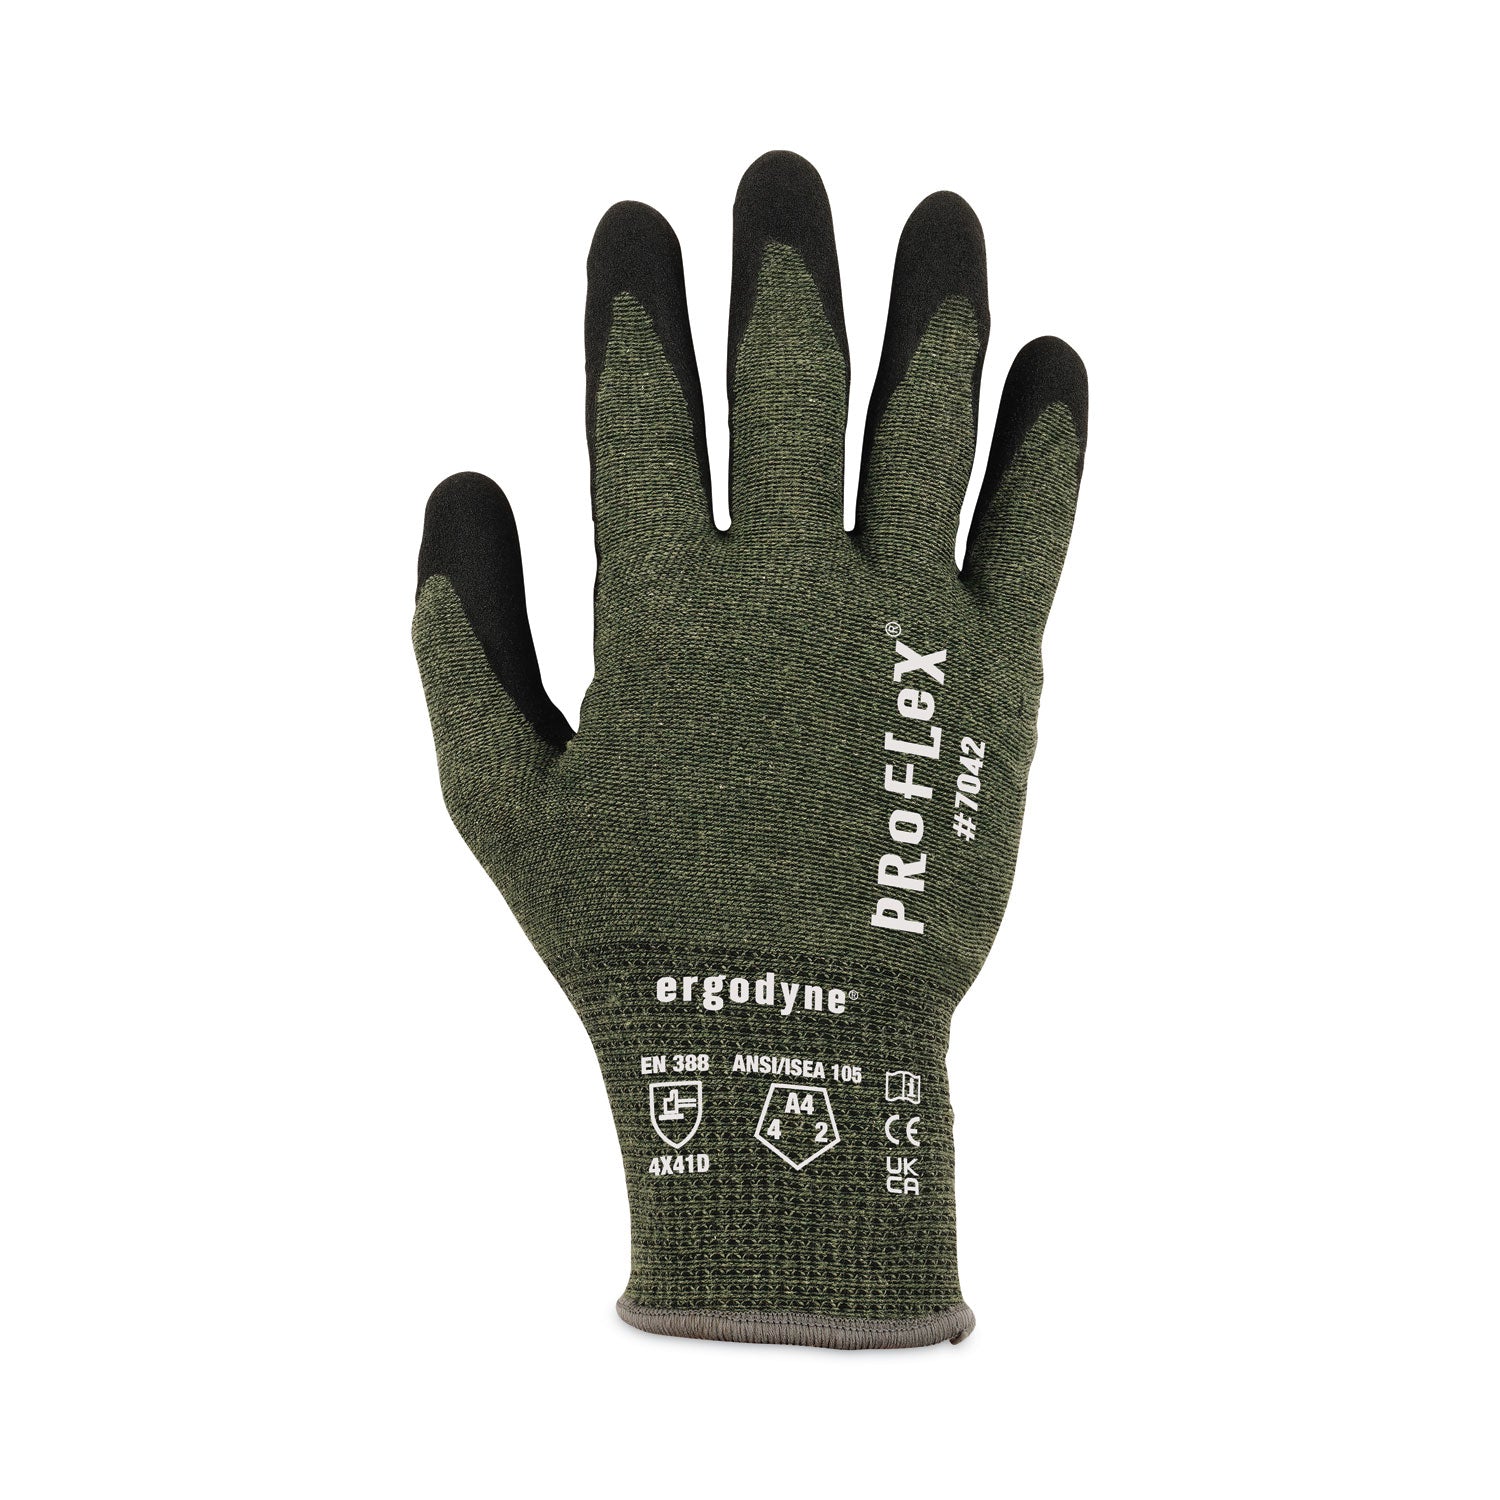 proflex-7042-ansi-a4-nitrile-coated-cr-gloves-green-x-large-12-pairs-pack-ships-in-1-3-business-days_ego10335 - 8